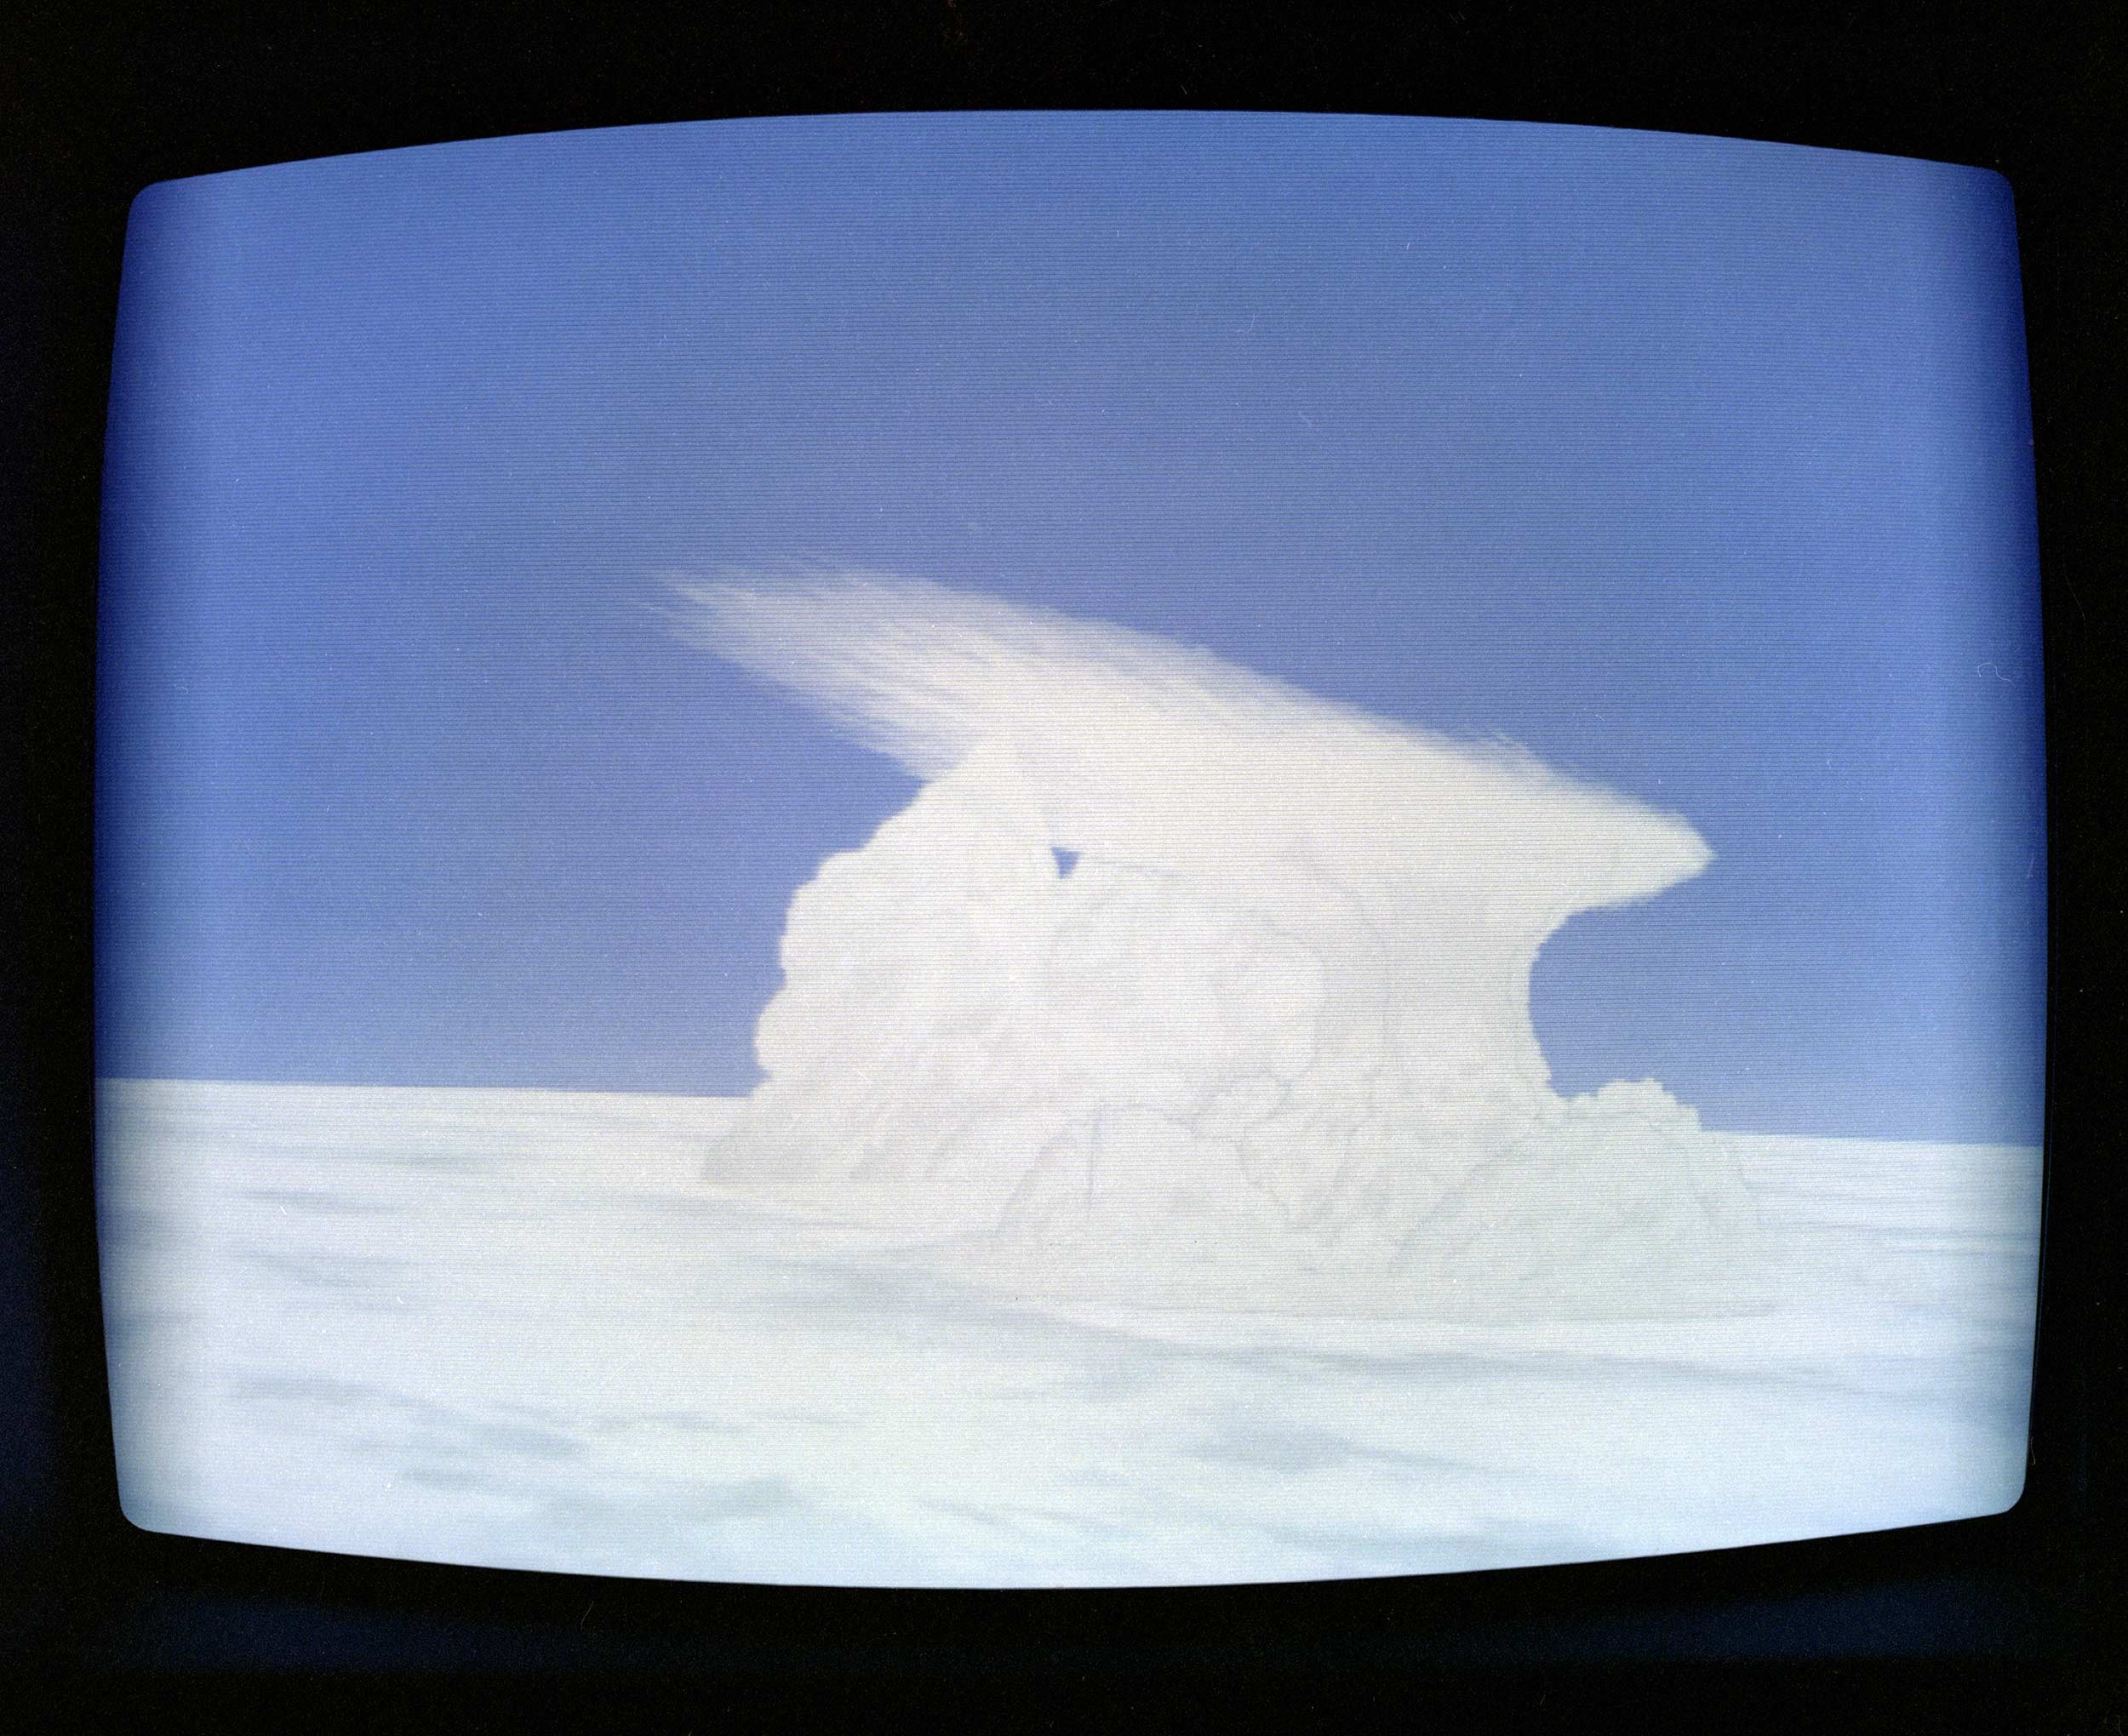  CAE MAXVUE, Anvil Cloud Render, 1992-02-29 Canadian Aviation Electronics Incorporated fonds Reproduced with the permission of Library and Archives Canada. © Library and Archives Canada&nbsp; 